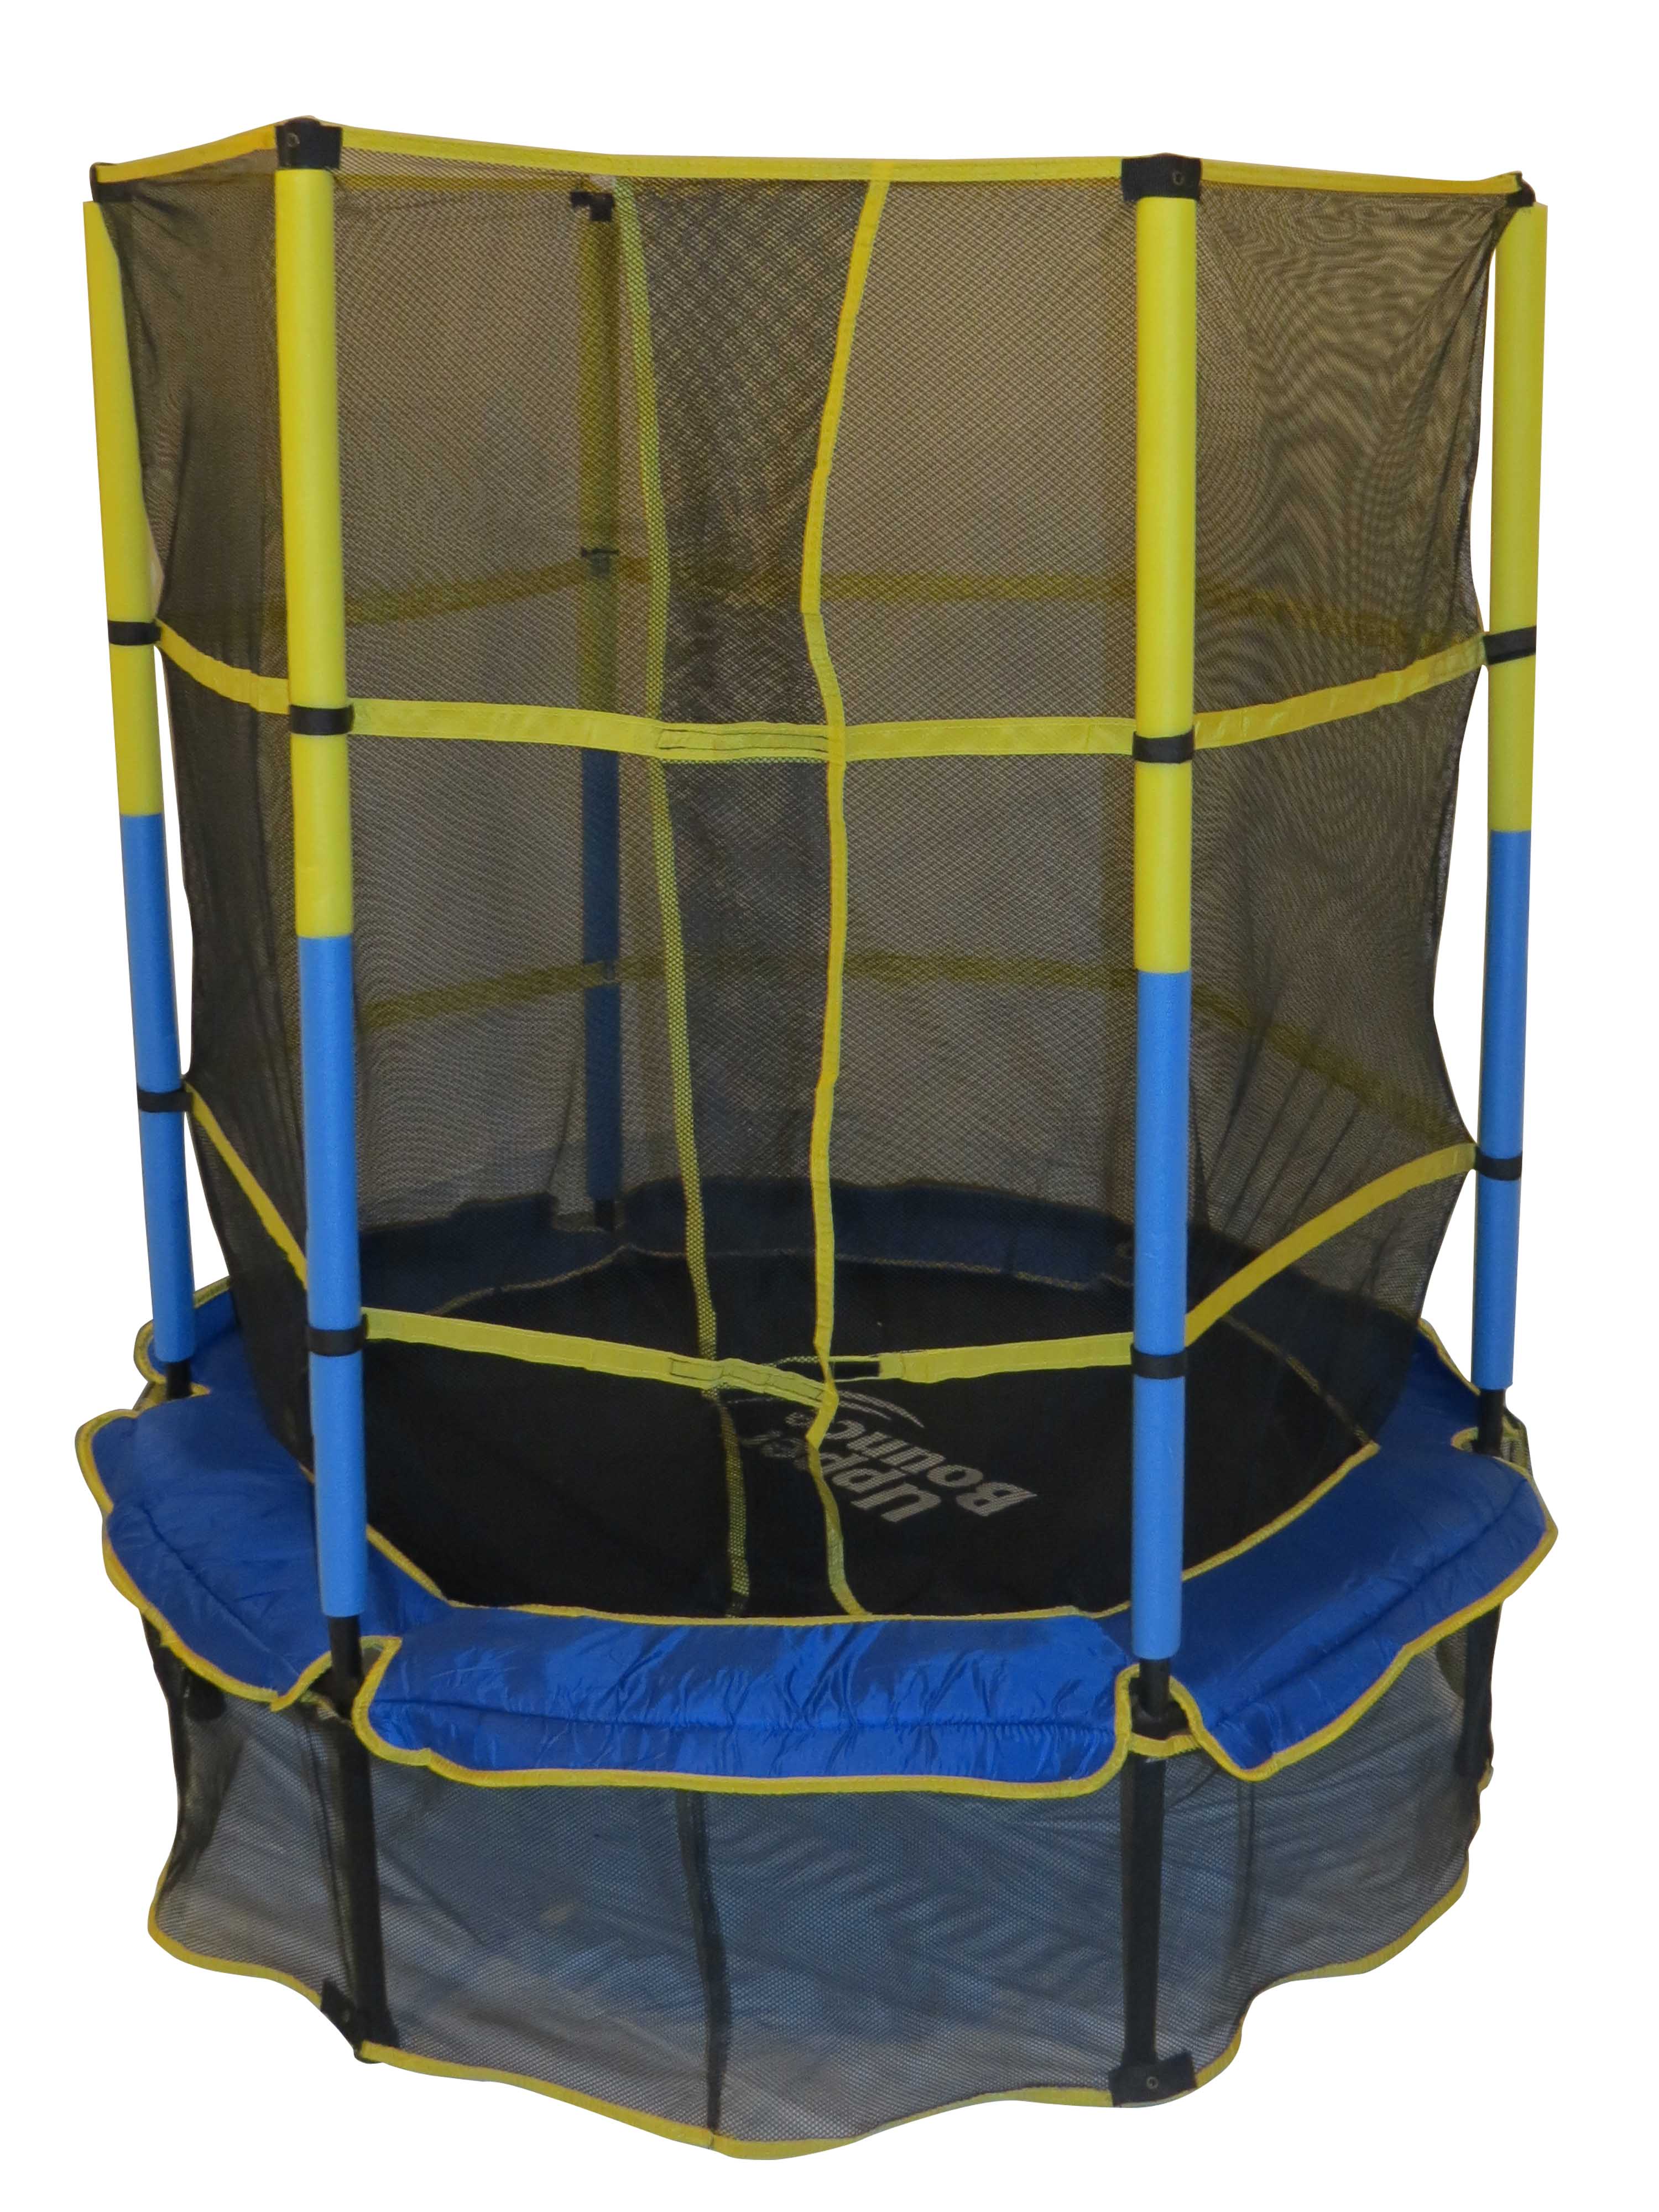 Picture of Upper Bounce UBSF01-55 55 in. Kid-Friendly Trampoline &amp; Enclosure Set equipped with in.Upper Bounce Easy Assemble Feature in.